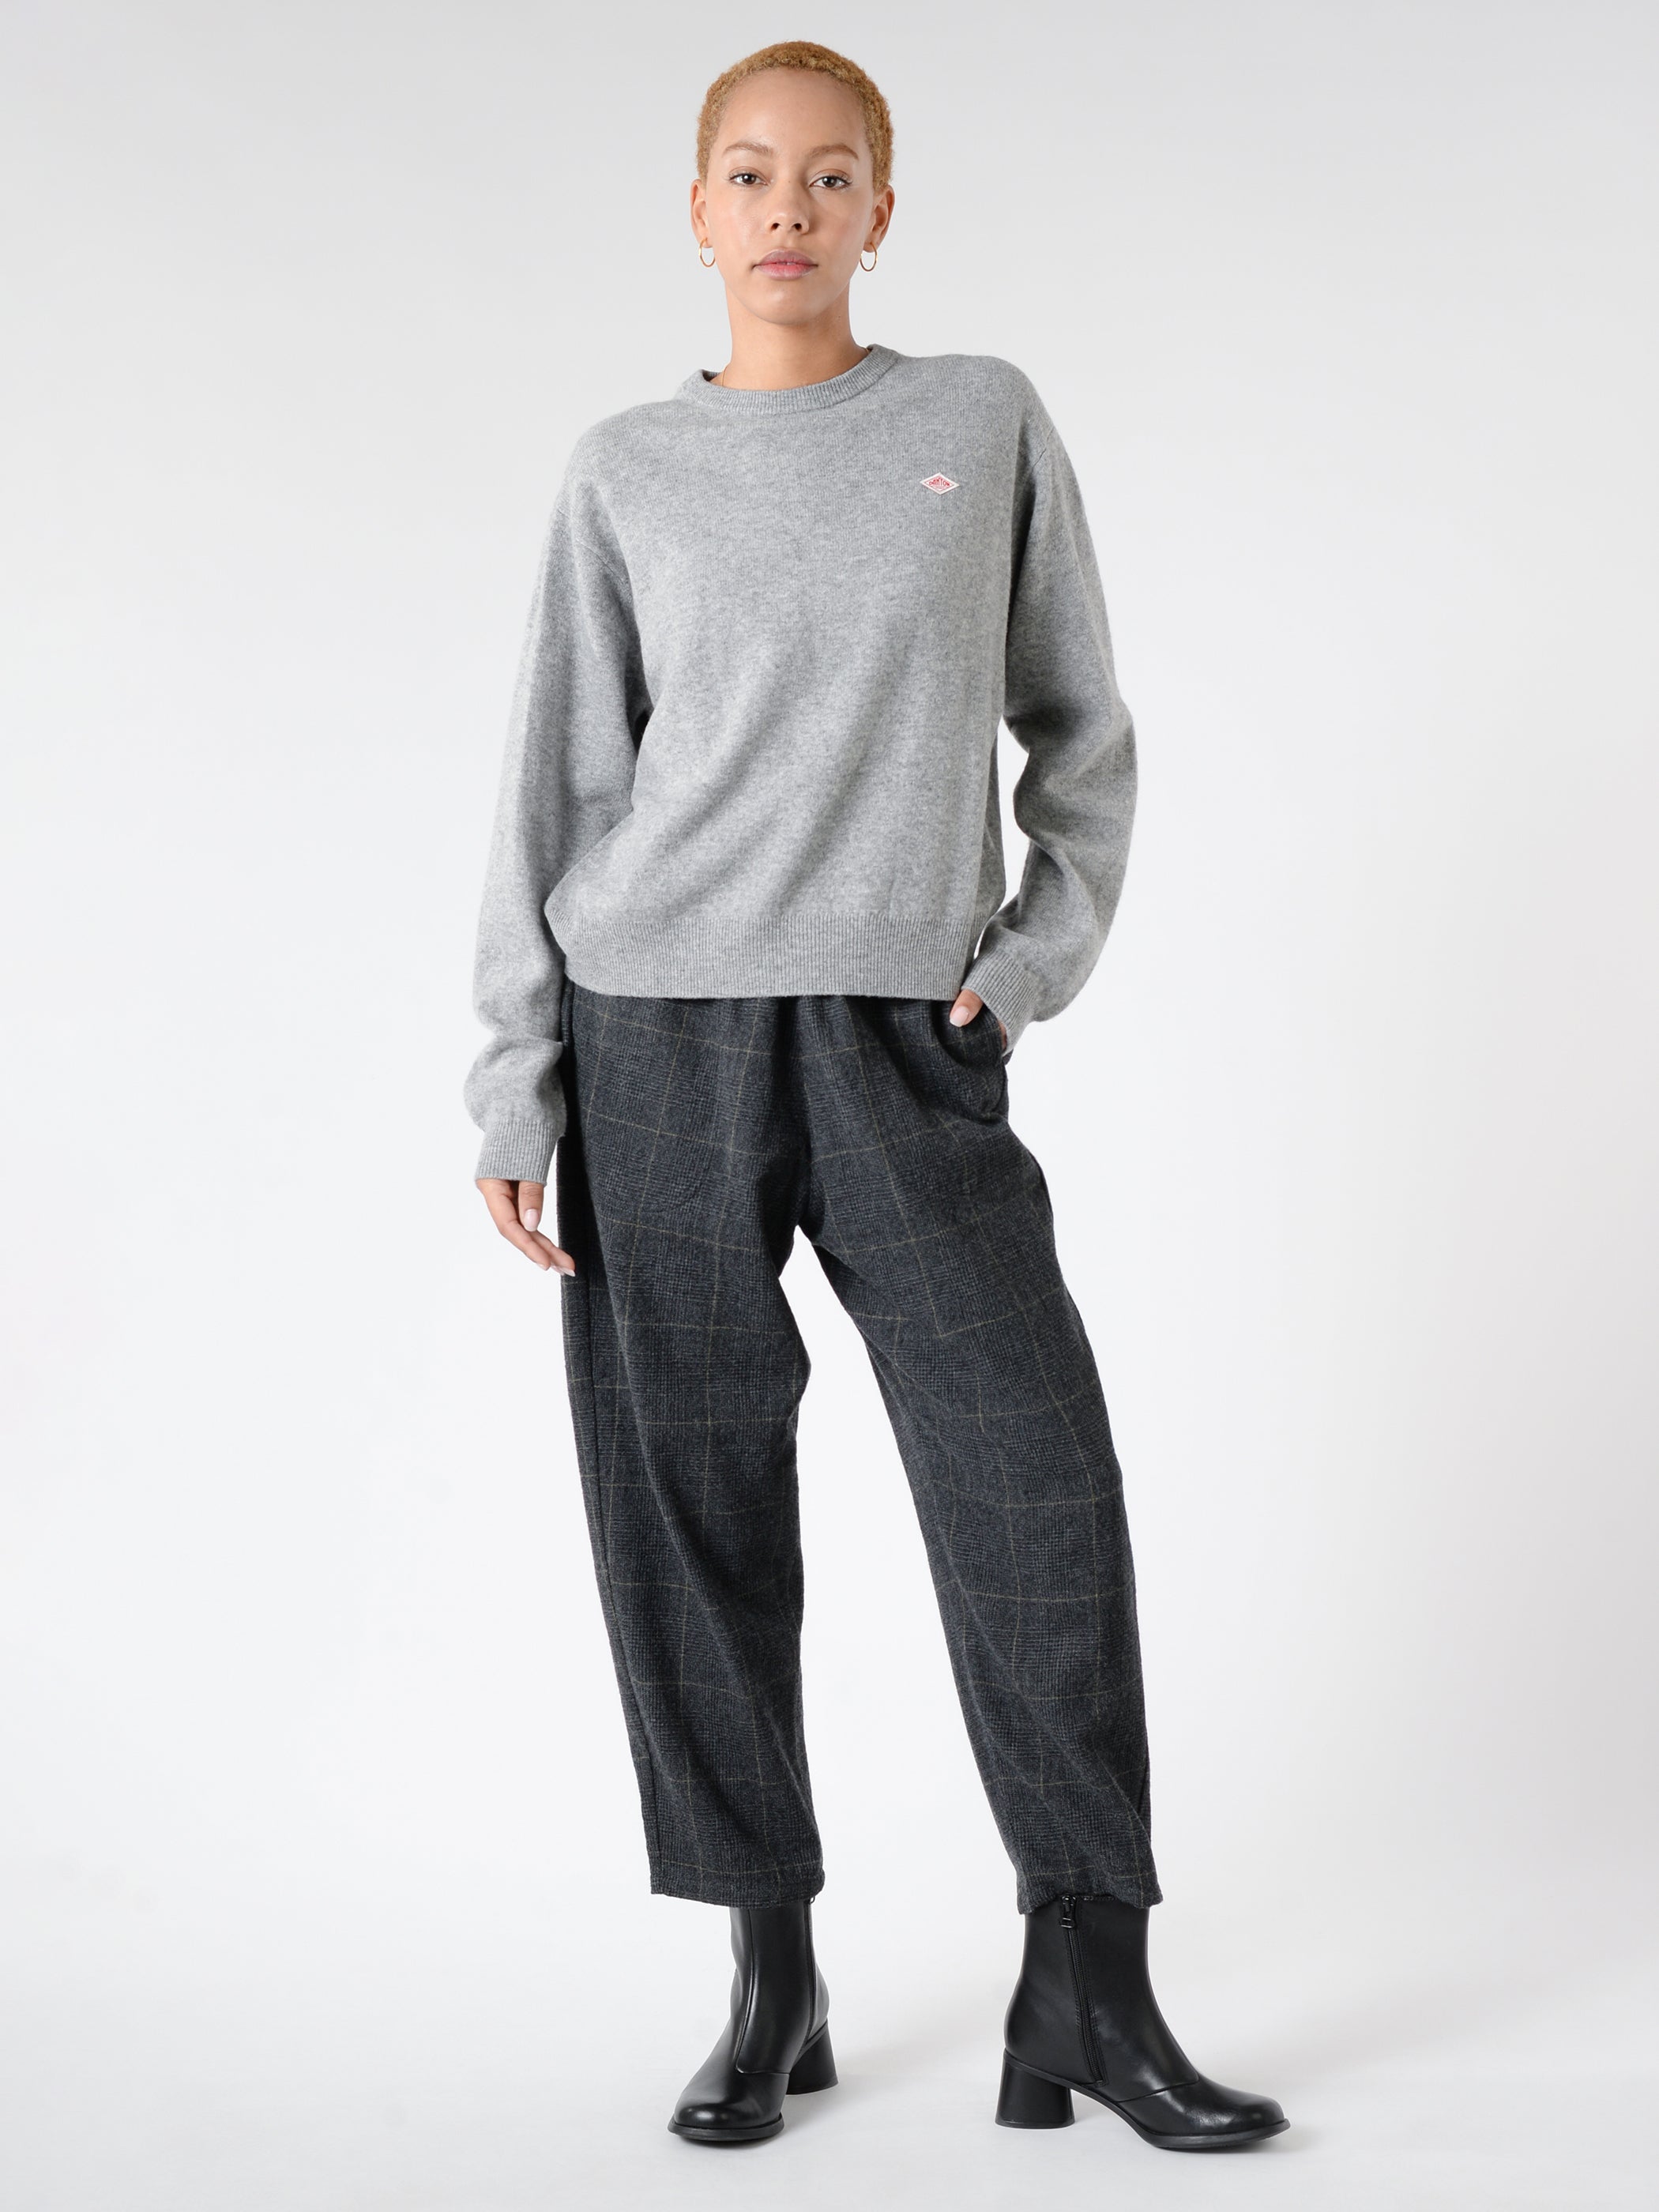 Women's Lambswool Crew Neck Knit Pullover